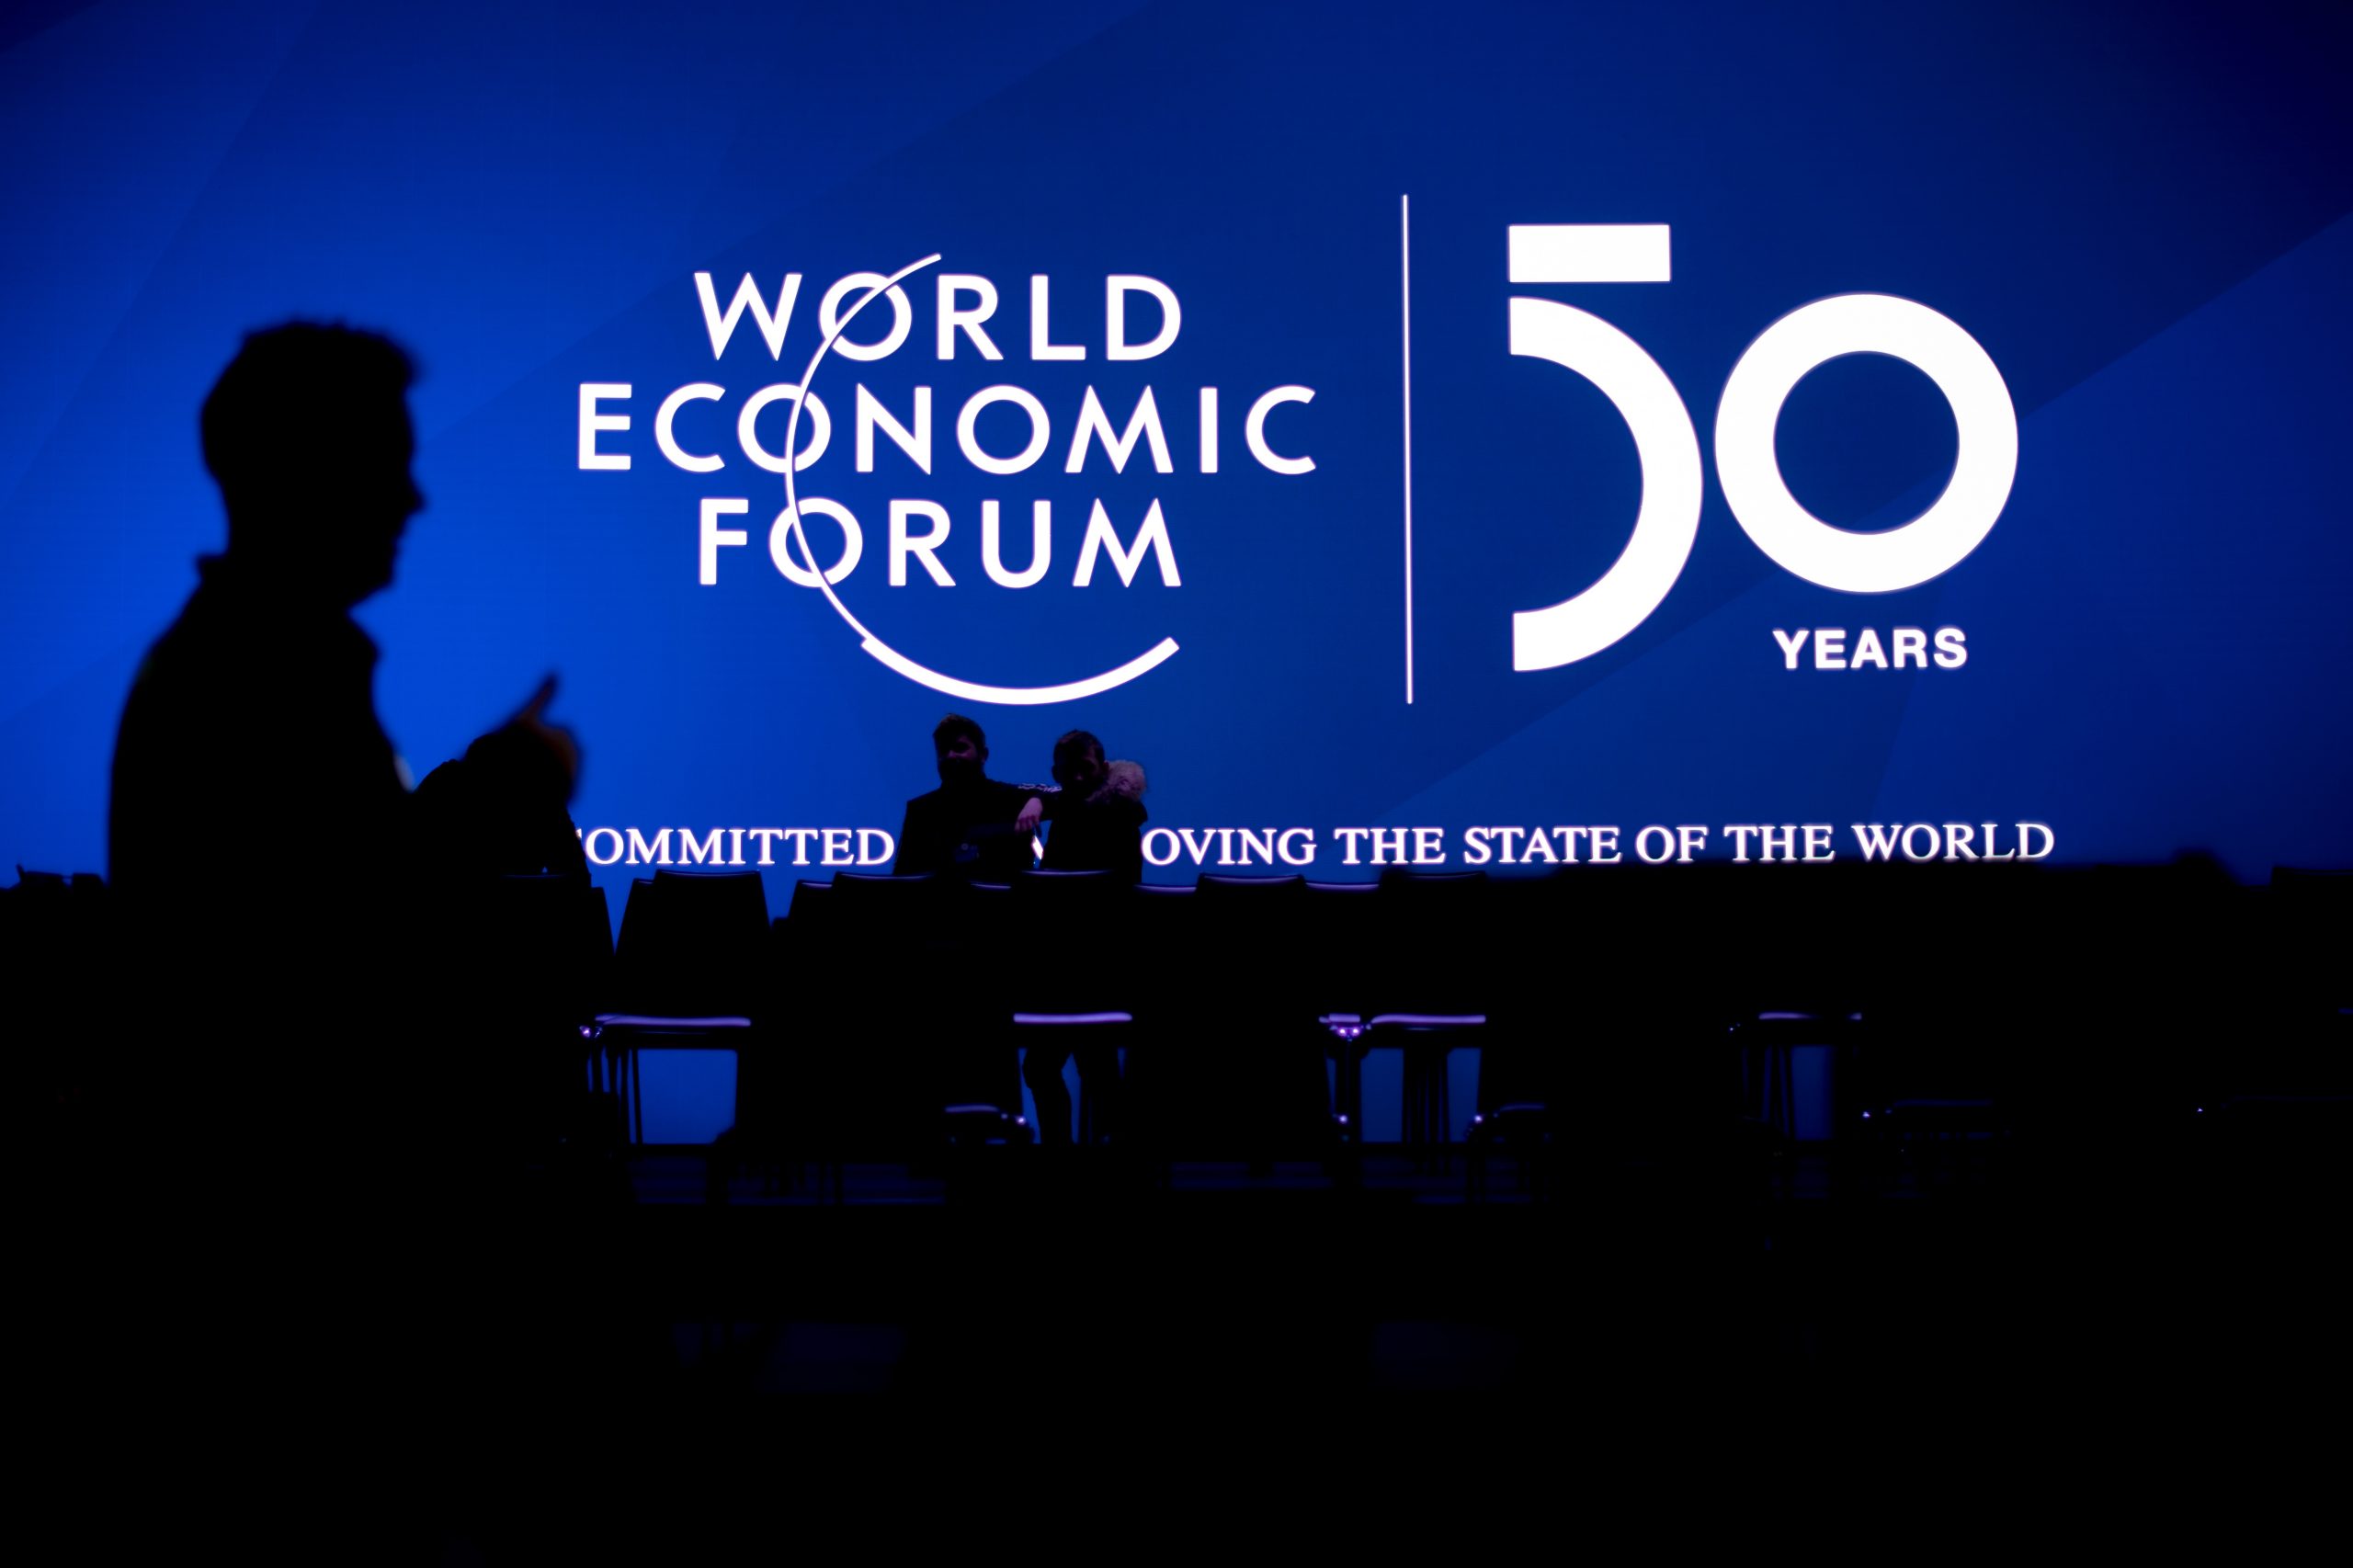 epa08140635 A worker sets the stage prior the 50th annual meeting of the World Economic Forum (WEF) in Davos, Switzerland, 19 January 2020. The meeting brings together entrepreneurs, scientists, corporate and political leaders in Davos under the topic 'Stakeholders for a Cohesive and Sustainable World' from 21 to 24 January 2020.  EPA/GIAN EHRENZELLER